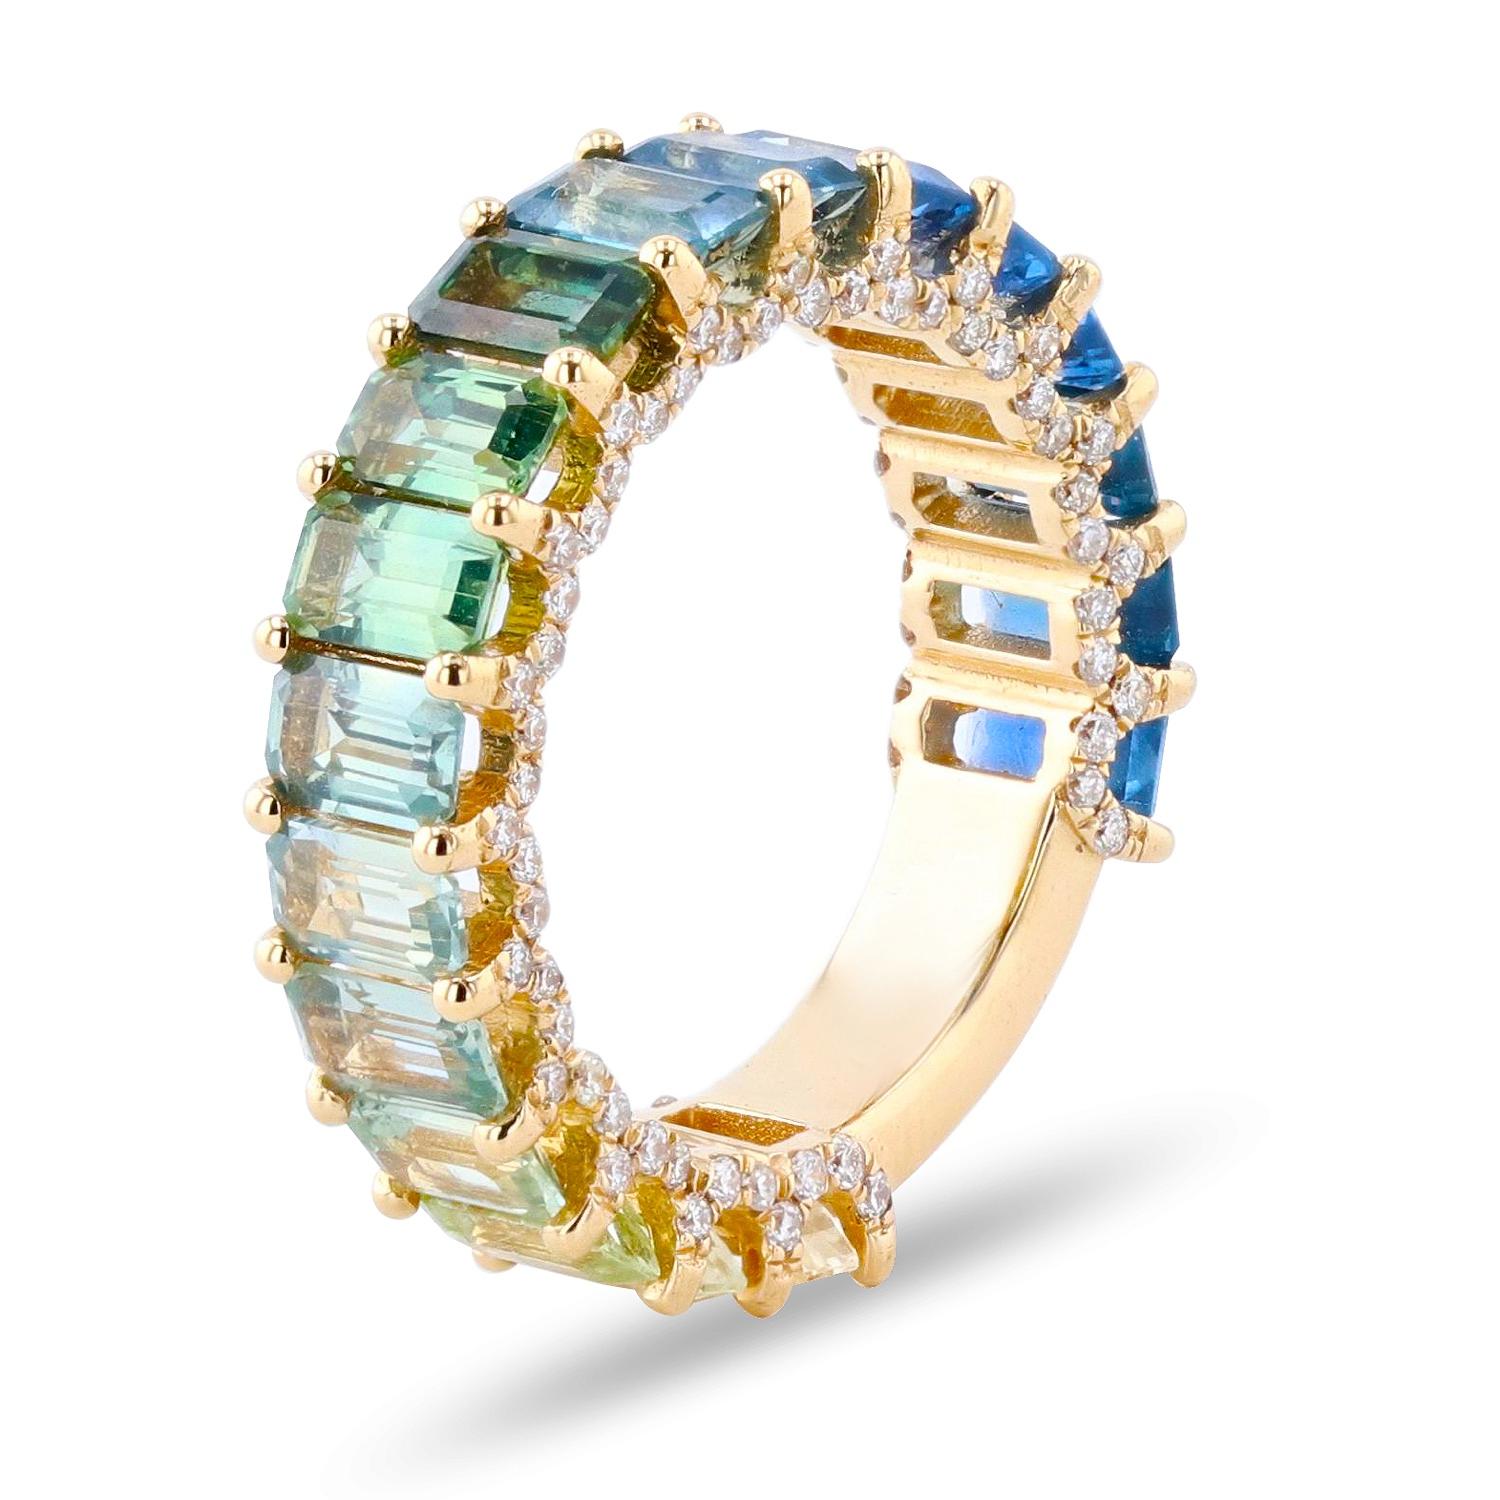 DETAILS:
- 6.22 carats of hand selected green to blue sapphires 
- .56 carats of round diamonds U- shape diamond wall detail along the sides of the band. 

Size 6.5 but can be sized one full size up or down.